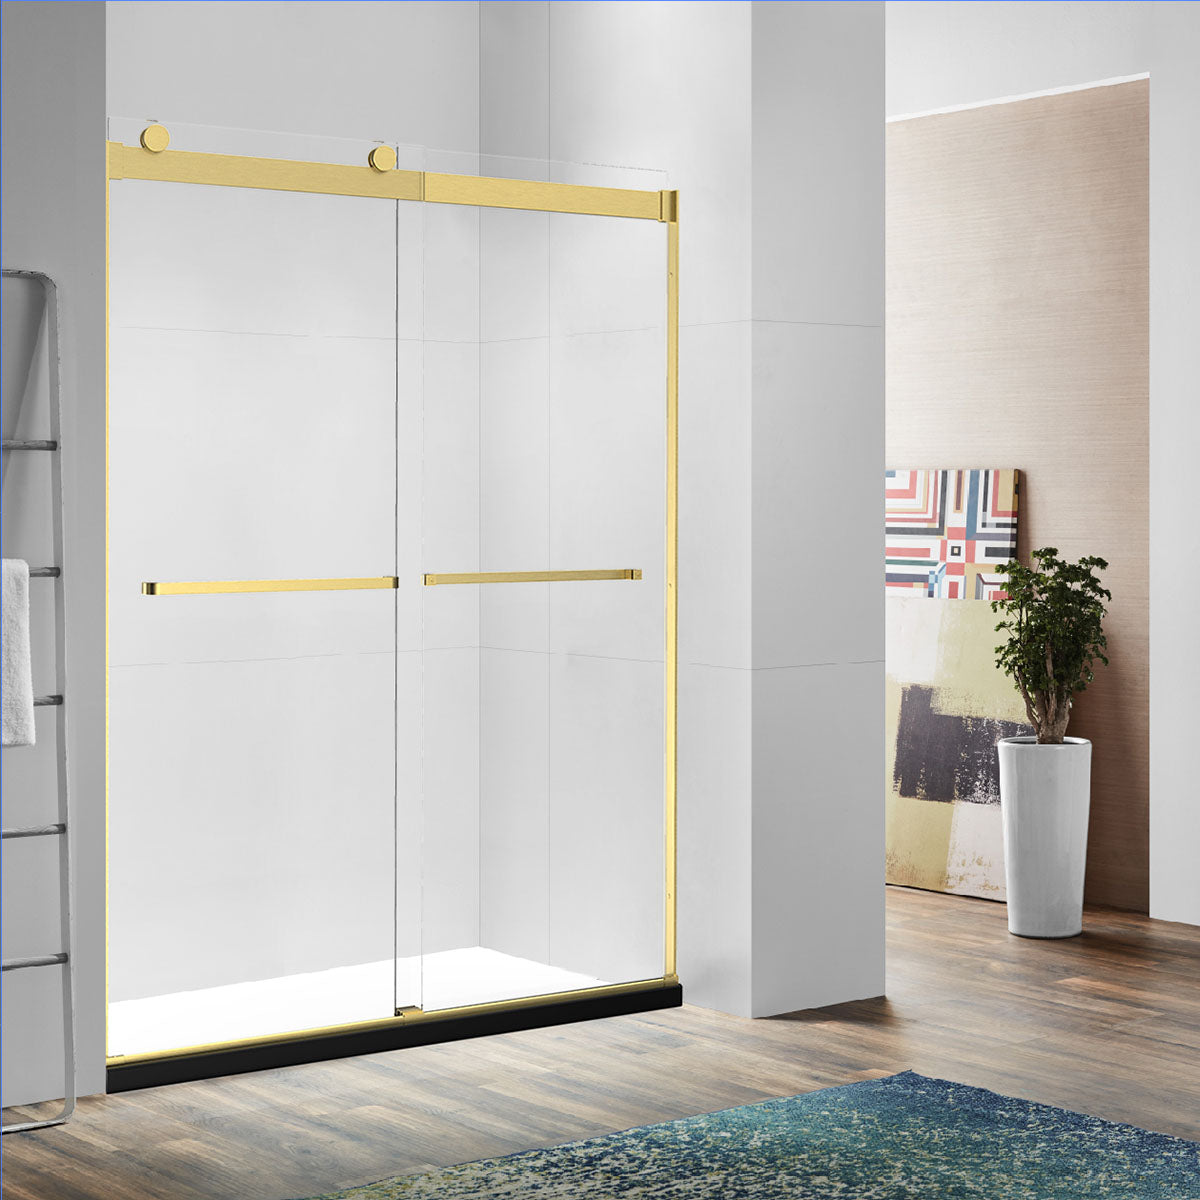 48" Ayden Series Frameless Bypass Shower Door with Klearteck Treatment (3/8" Thickness) (Brushed Gold)